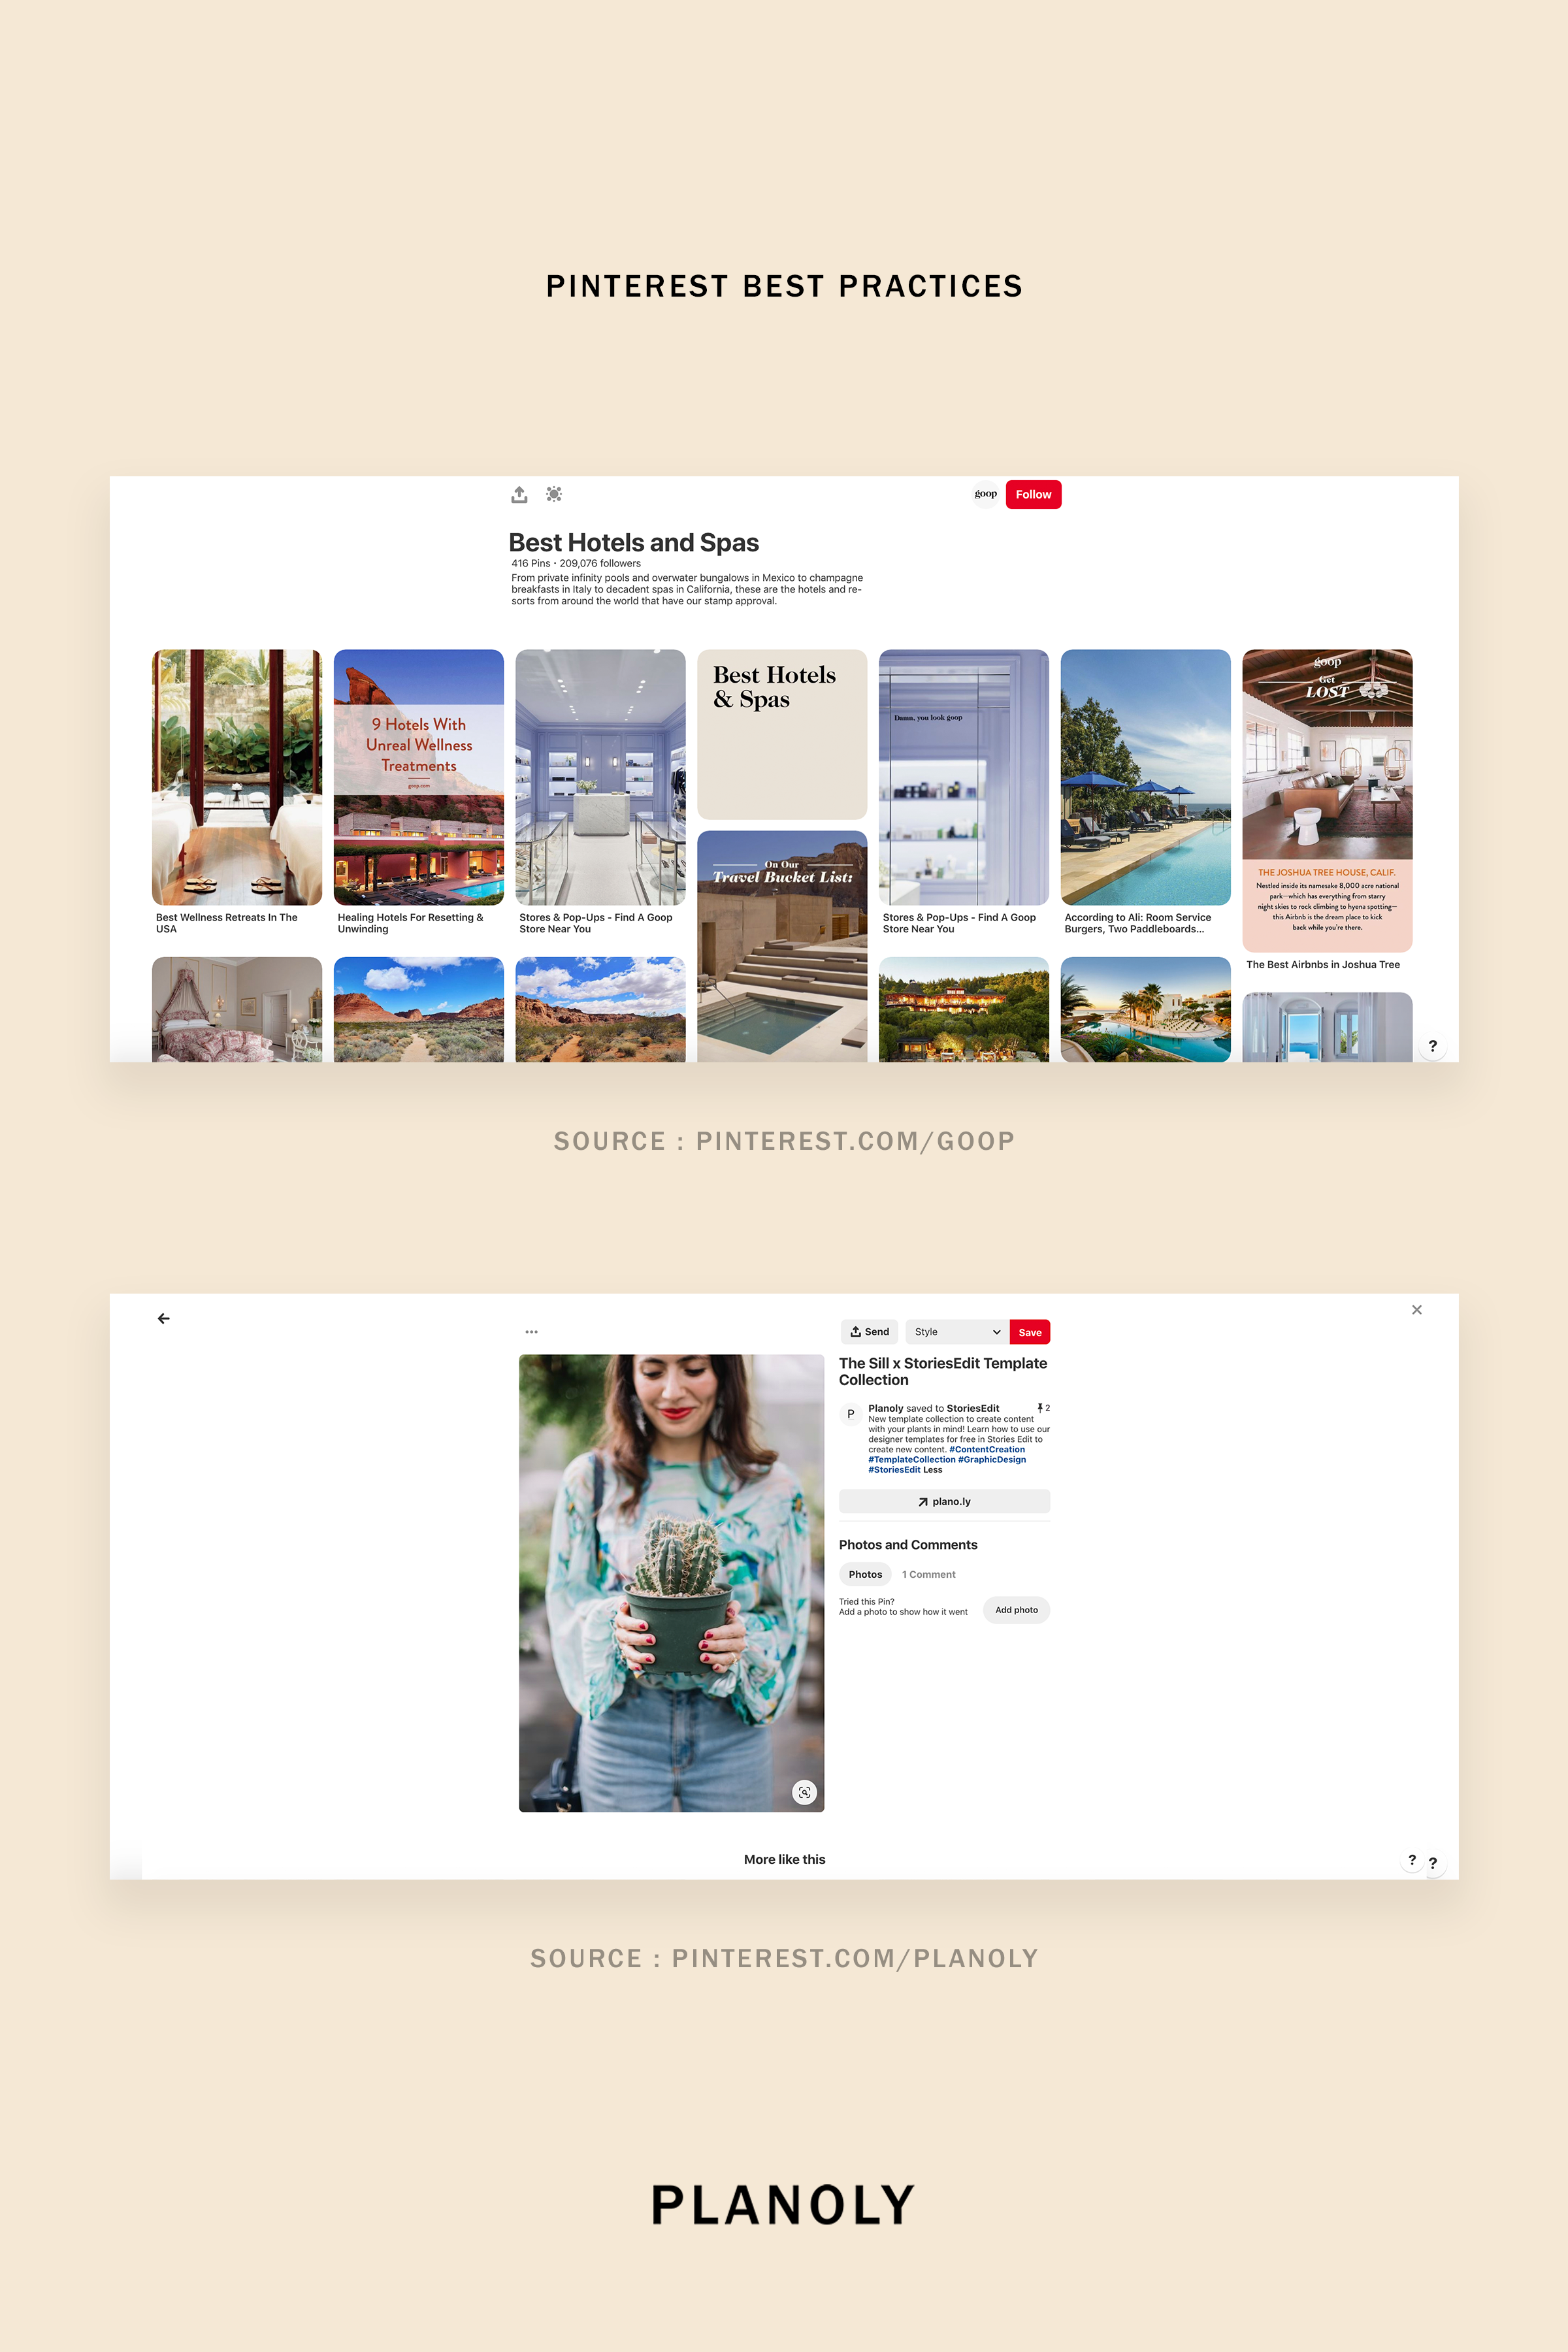 A Definitive Guide to Pinterest Best Practices